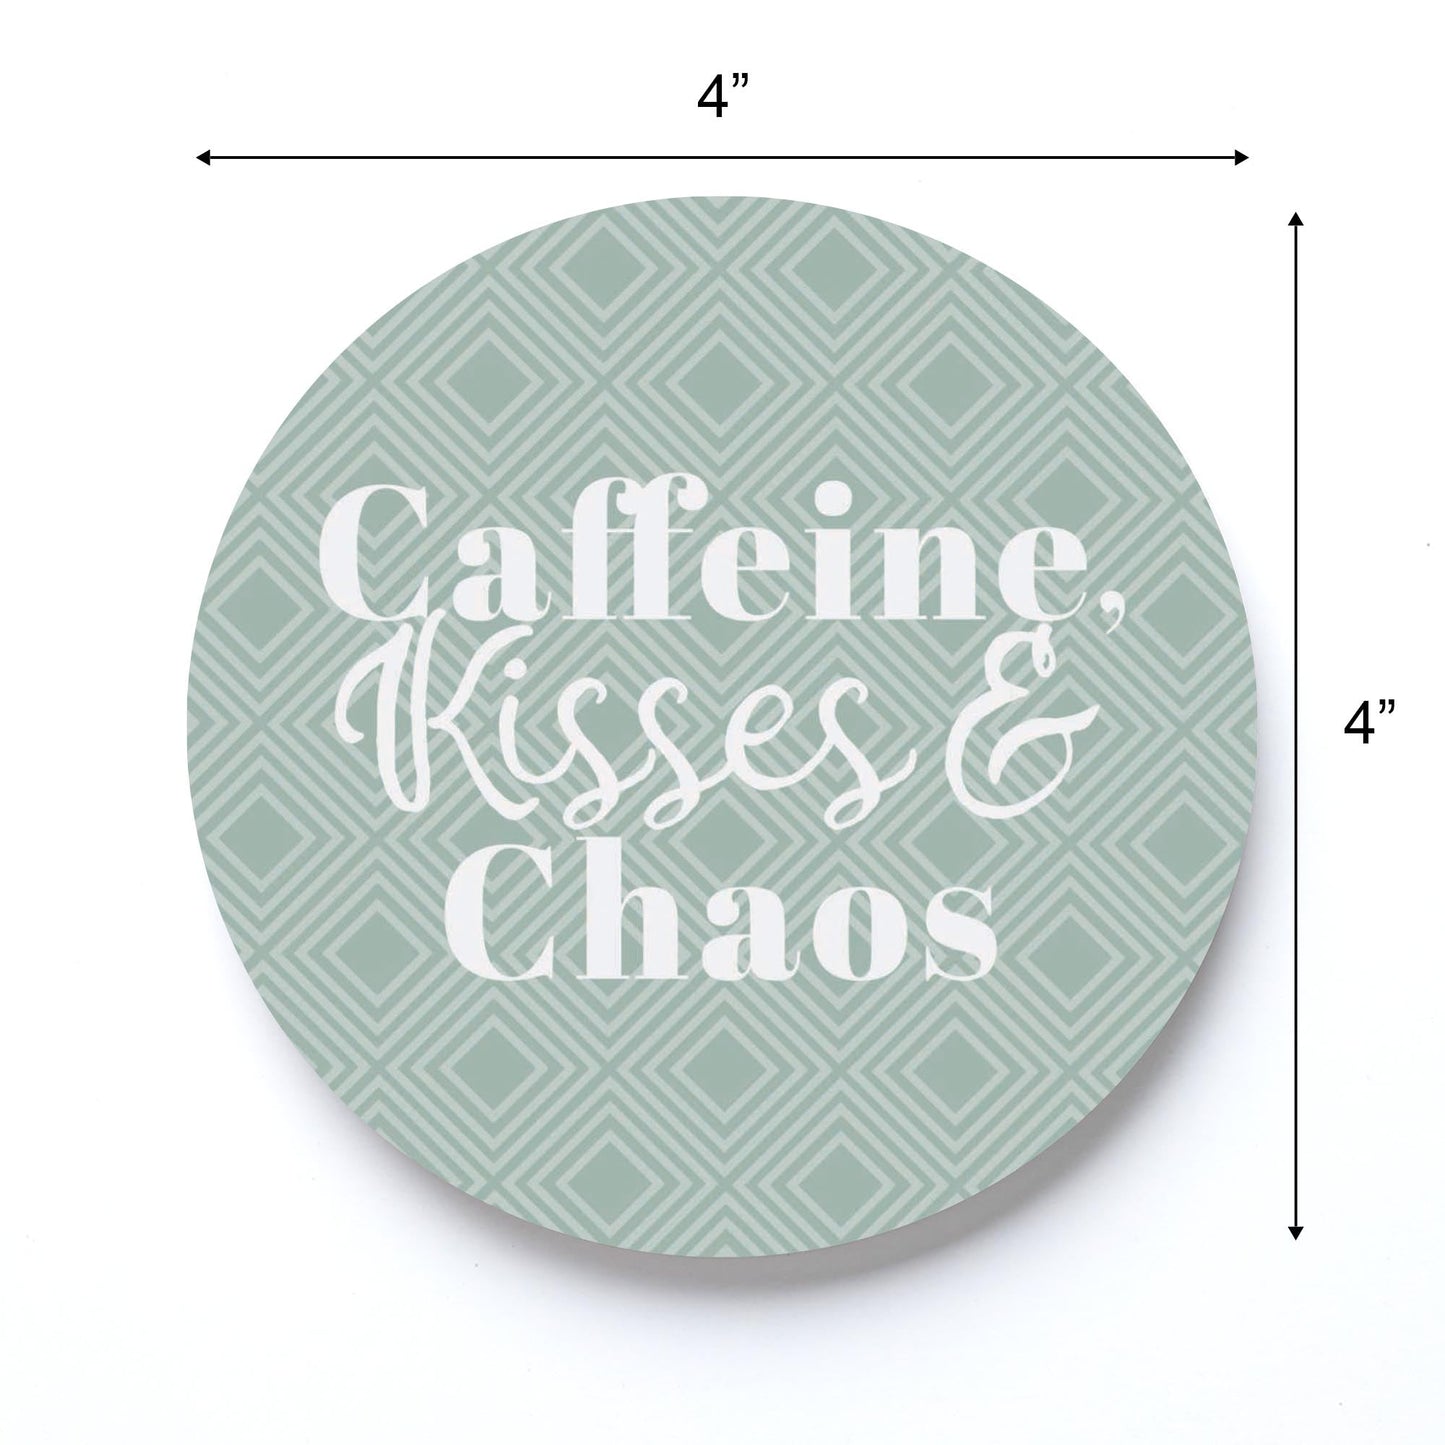 Mother's Day Caffeine Kisses & Chaos Green | 4x4